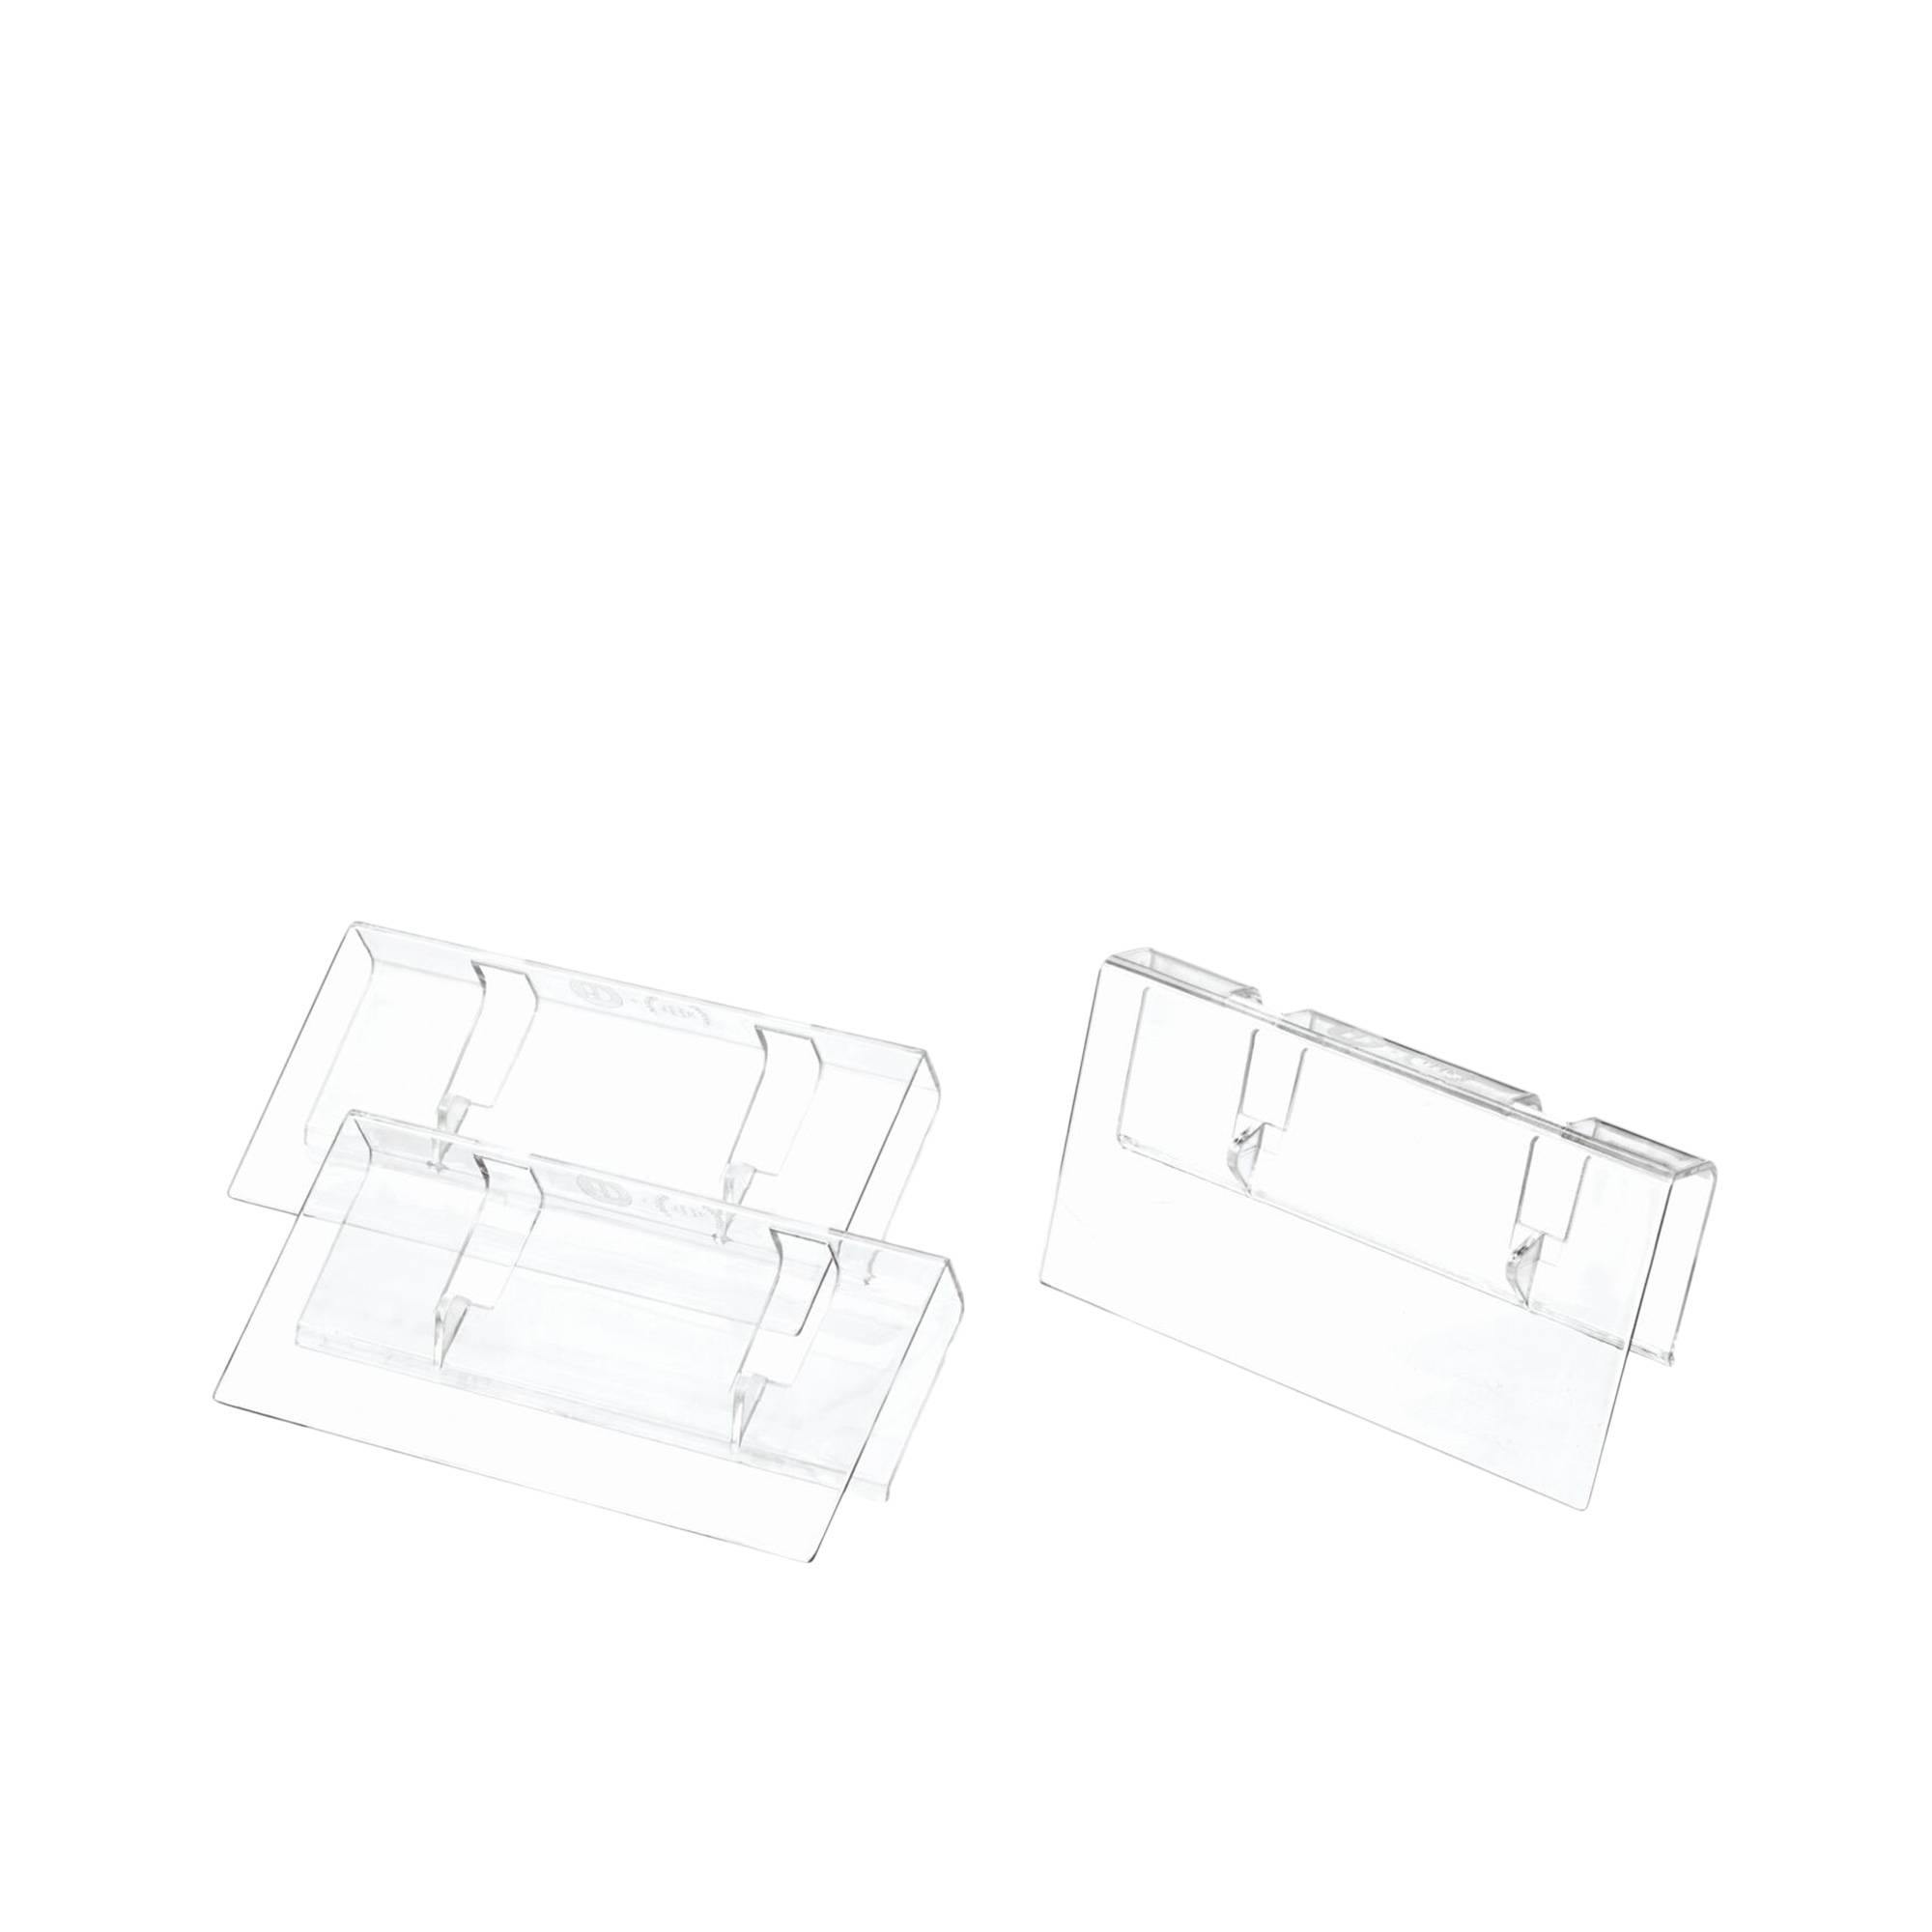 The Home Edit by iDesign Label Clip Set of 3 Image 1